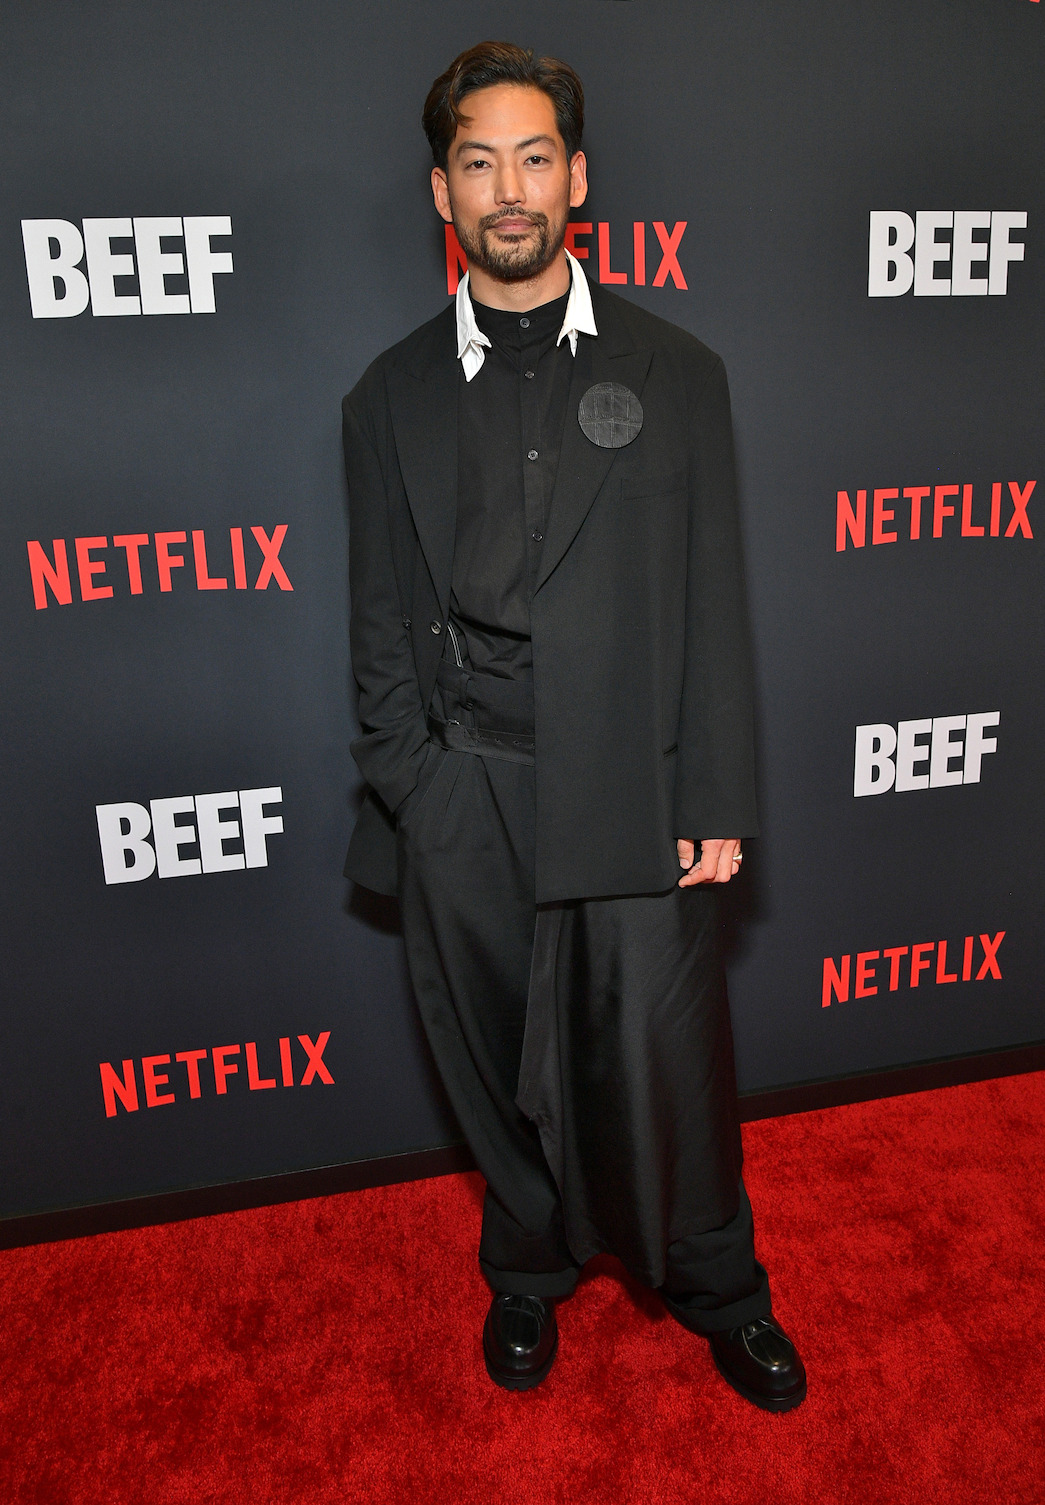 Joseph Lee at the Los Angeles Premiere of Netflix's "BEEF" on March 30, 2023 in Hollywood, California.